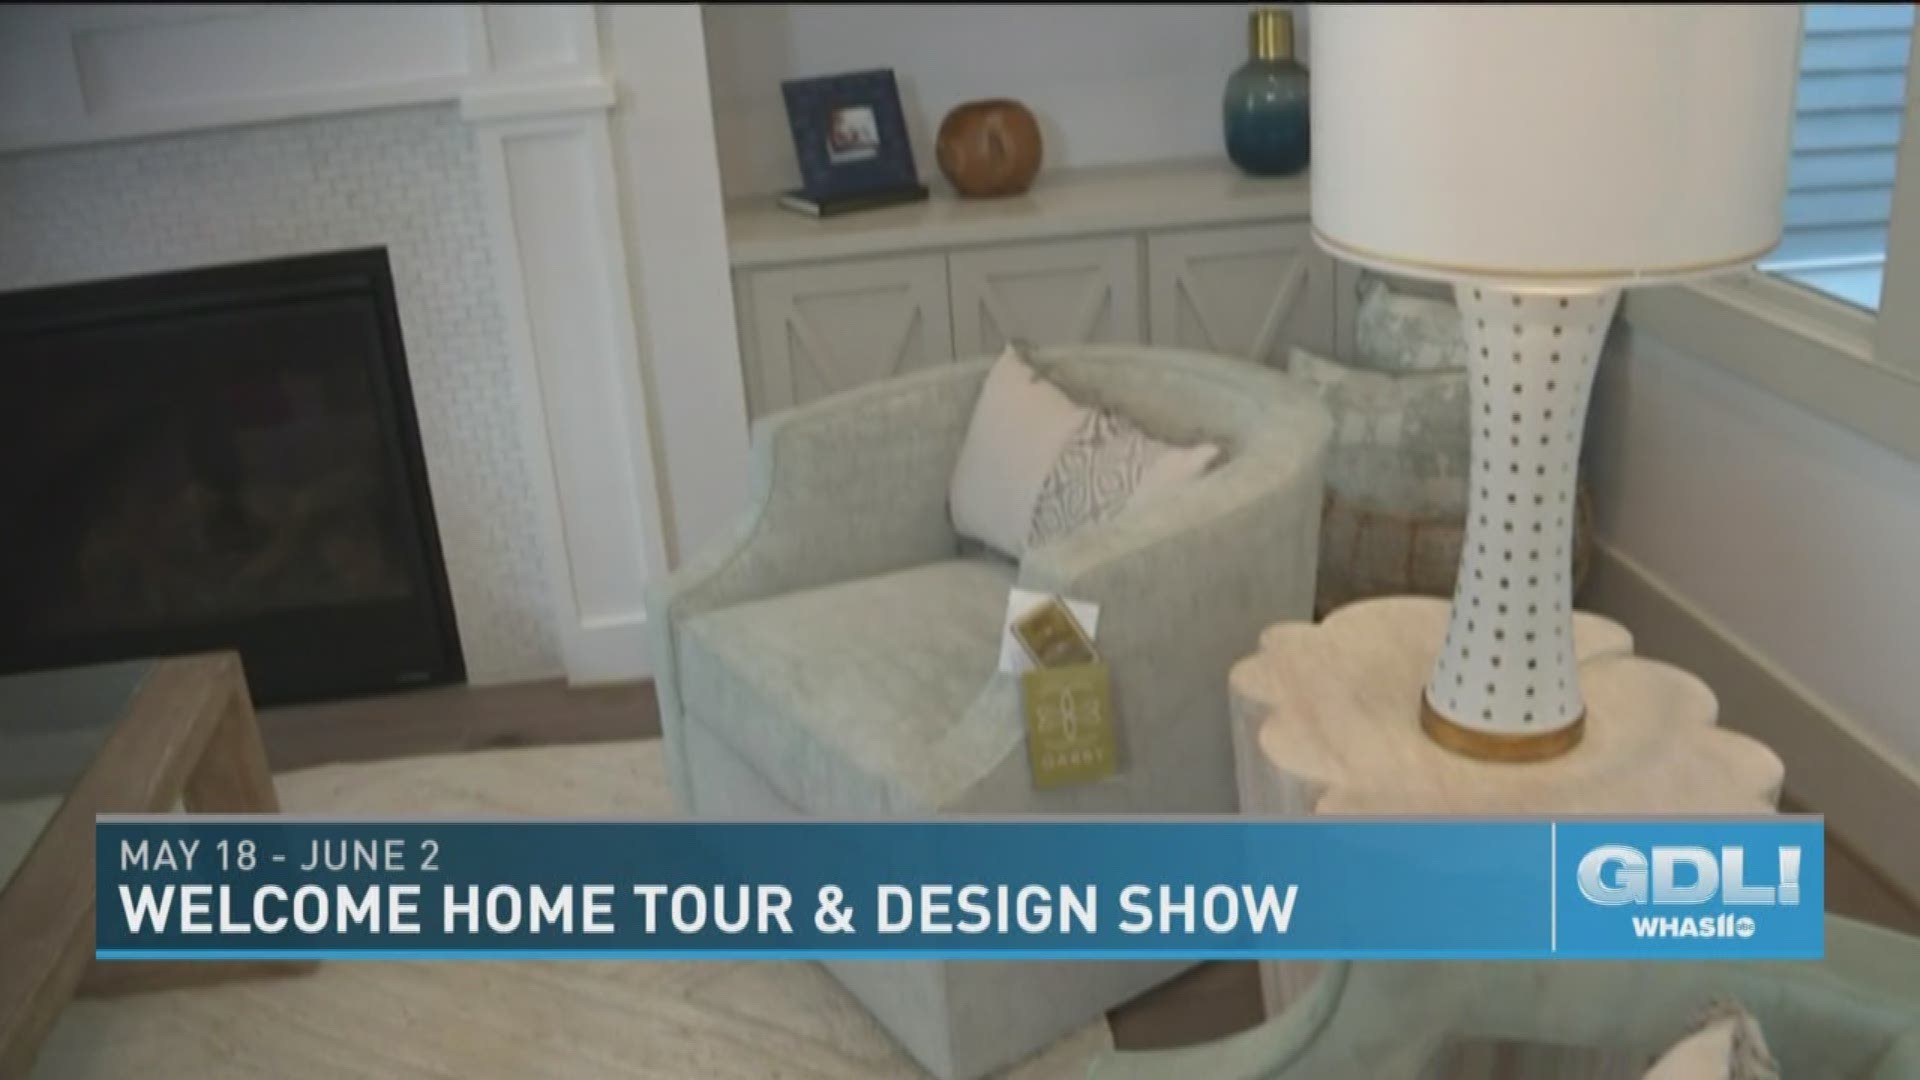 You can take the Norton Commons Welcome Home Tour and check out designs by Summer Classics May 18 through June 2, 2019.